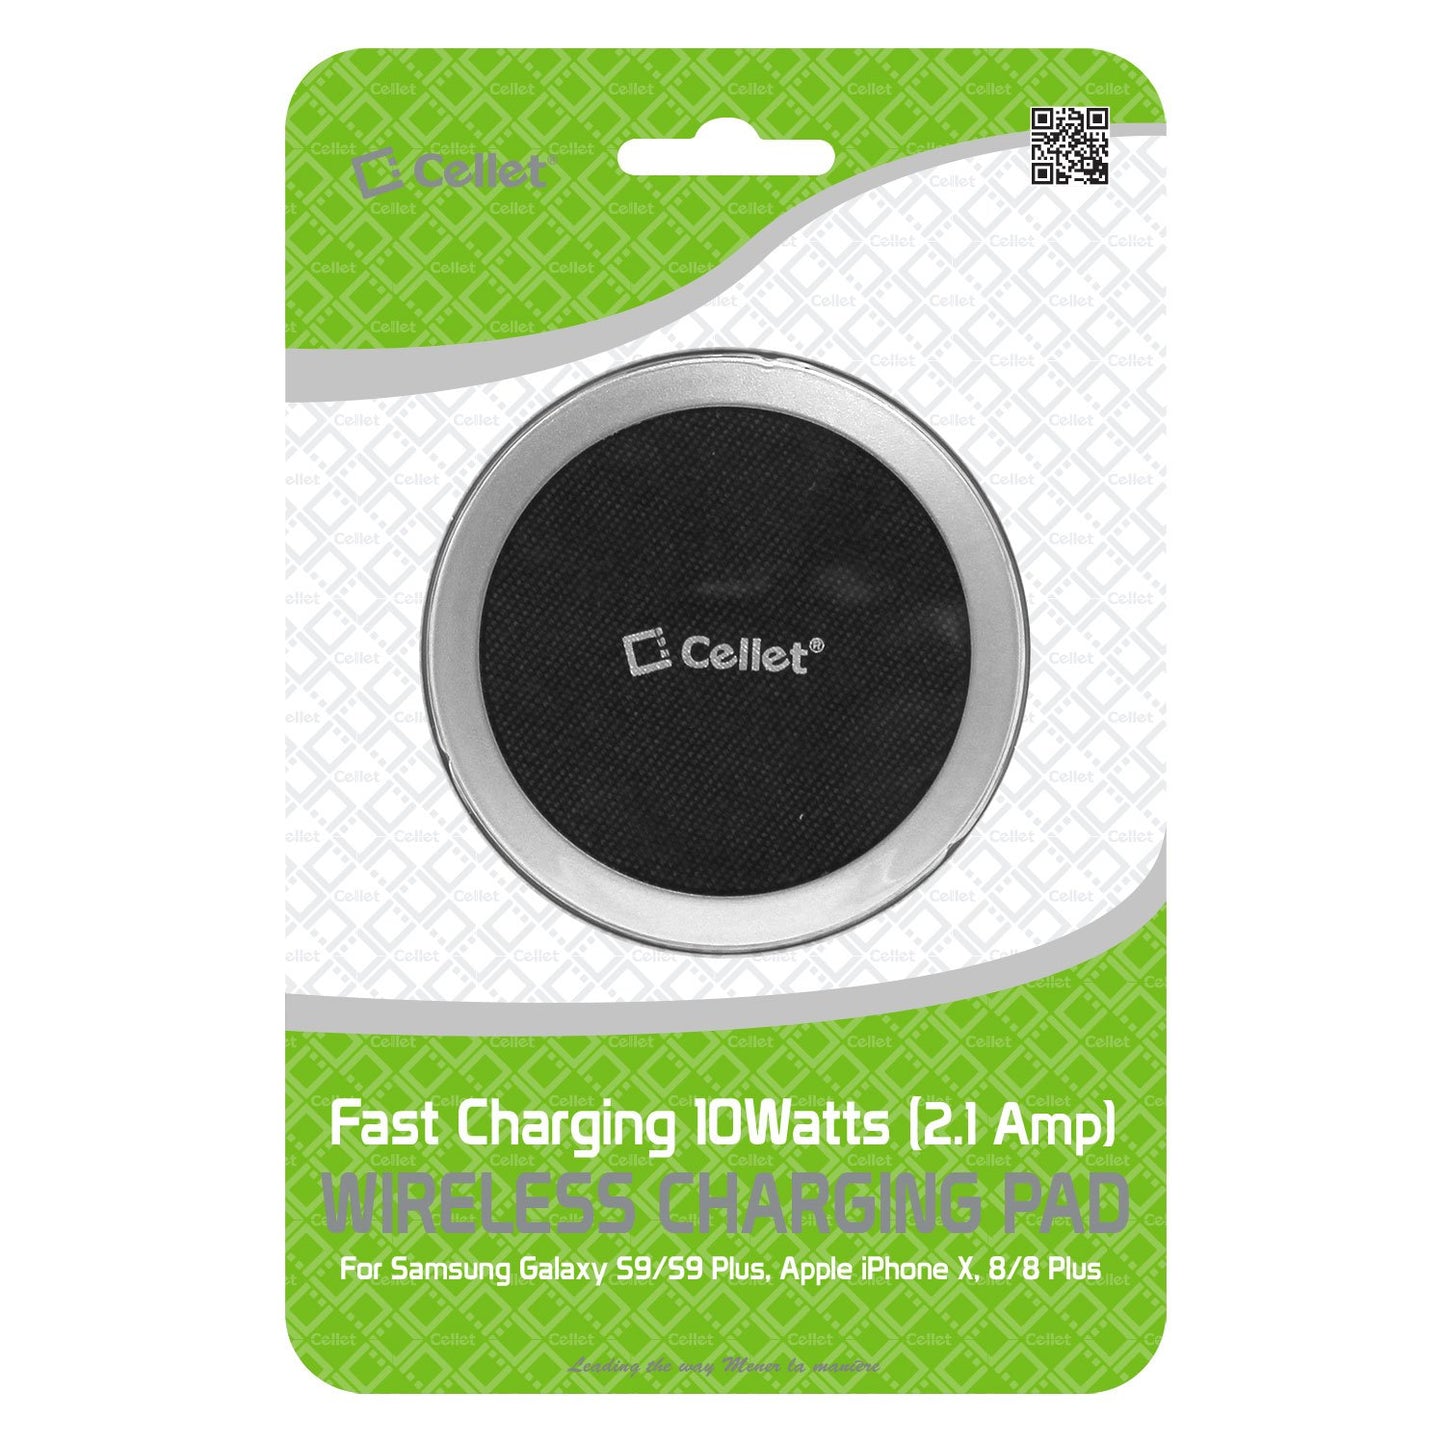 QI500 - Wireless Charging Pad, High Power 10 Watts (2.1 Amp) for Samsung Galaxy S9/S9 Plus, Apple iPhone X and All Wireless (Qi) Enabled Devices